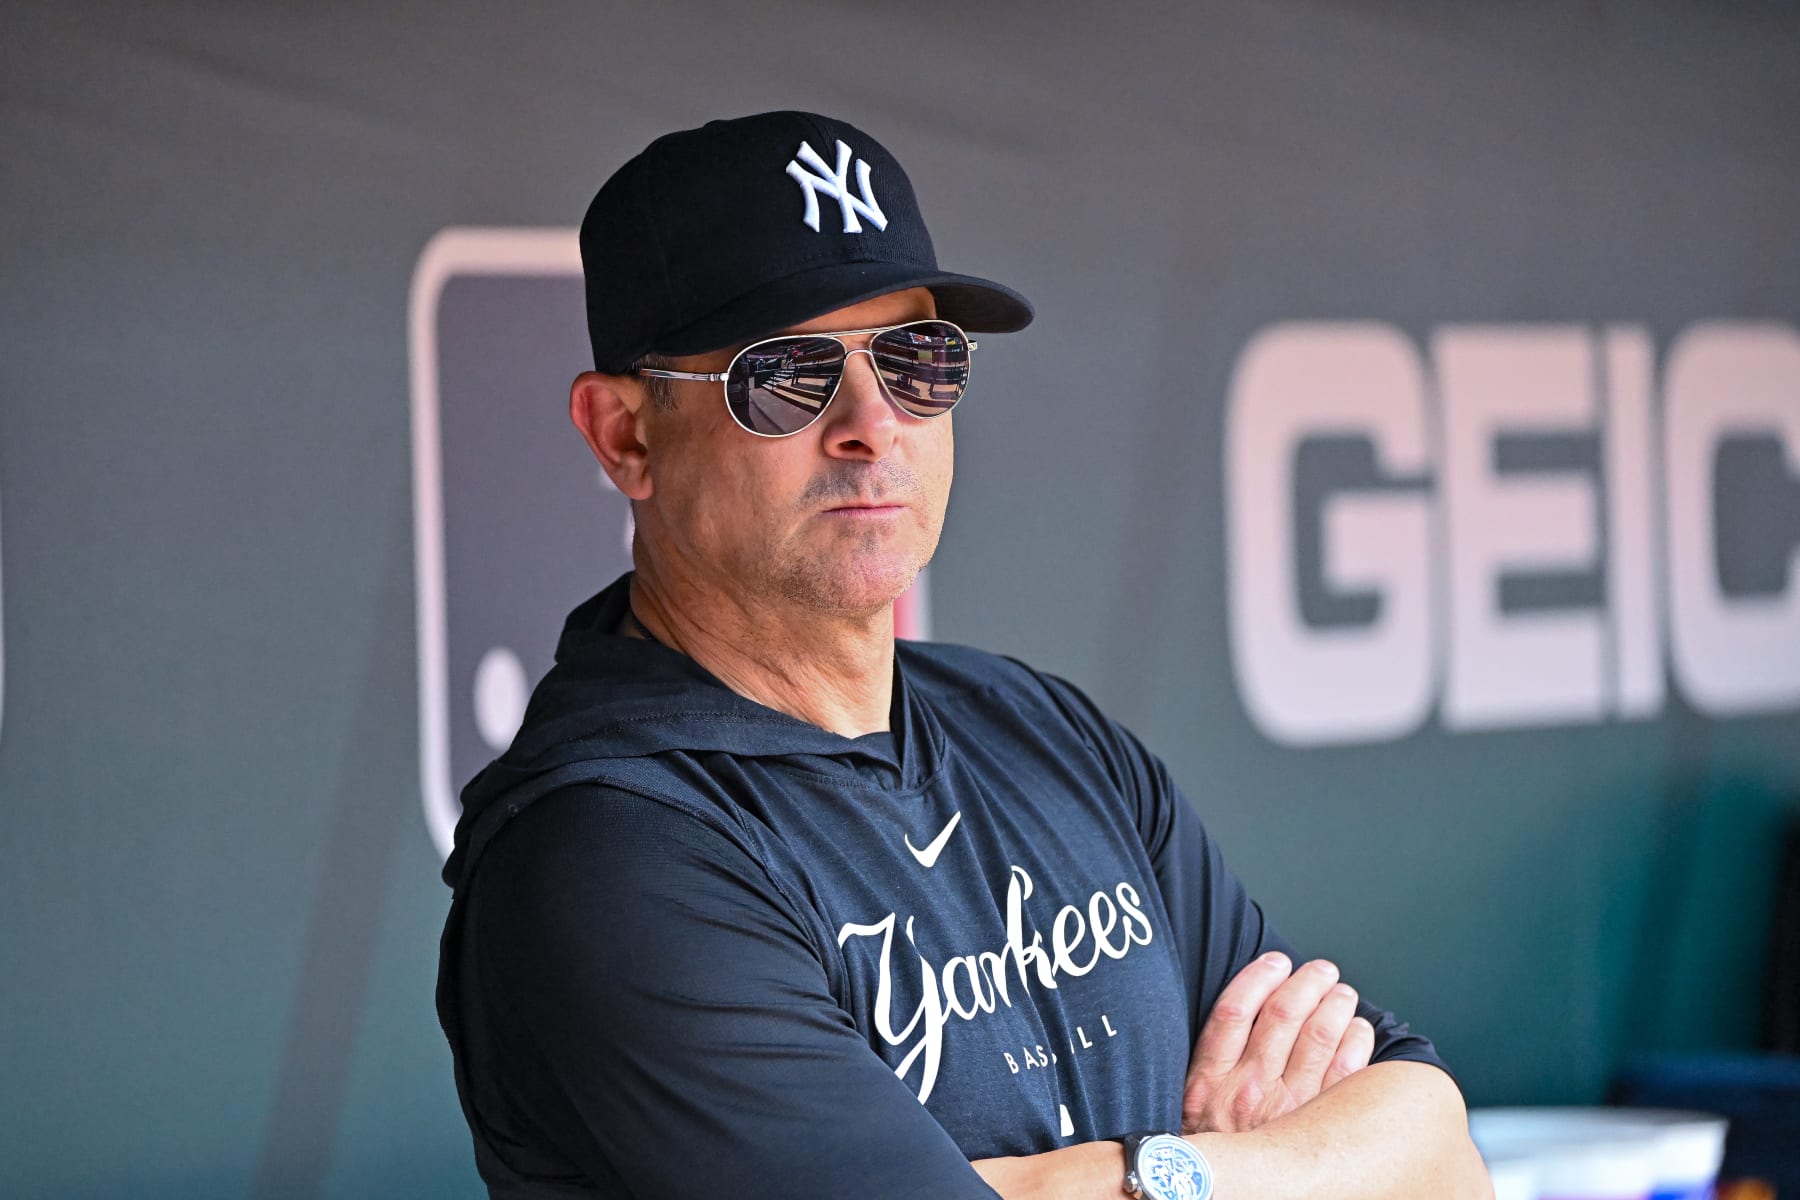 MLB hot seat rankings: Six managers who could be on chopping block